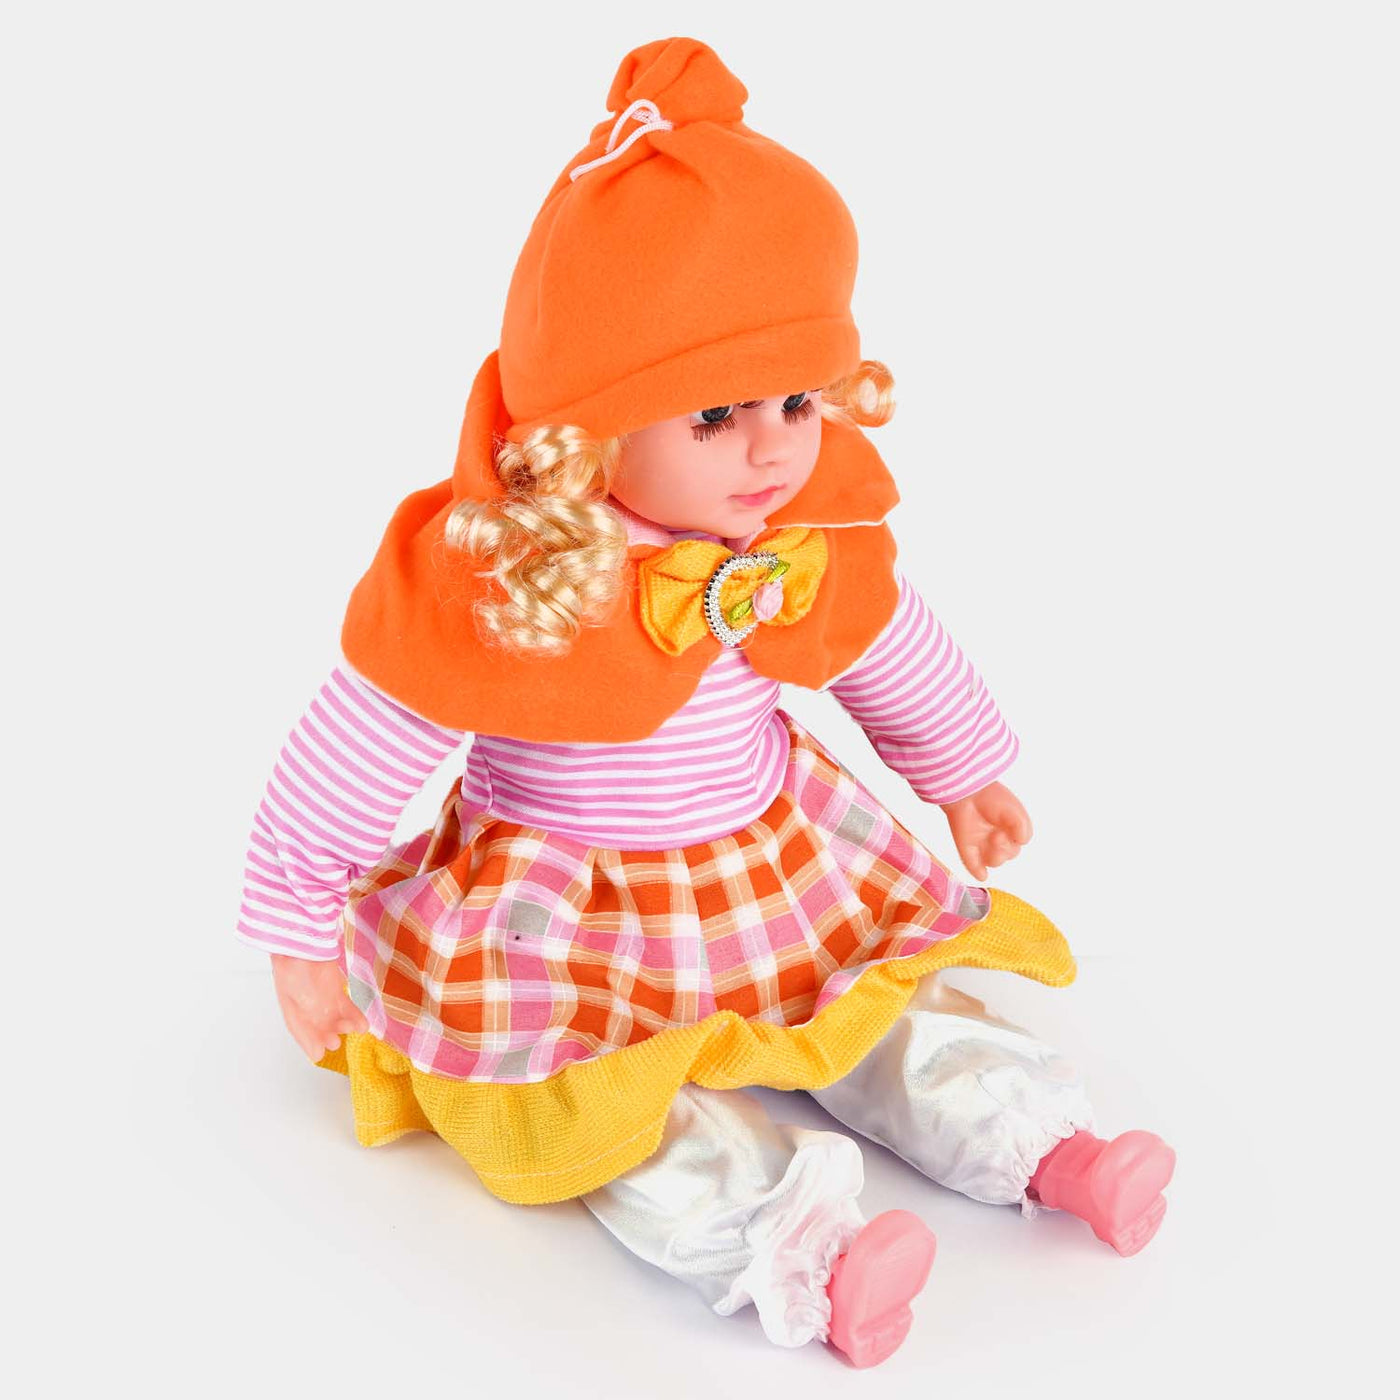 Smart Baby Doll With Sound | 24"